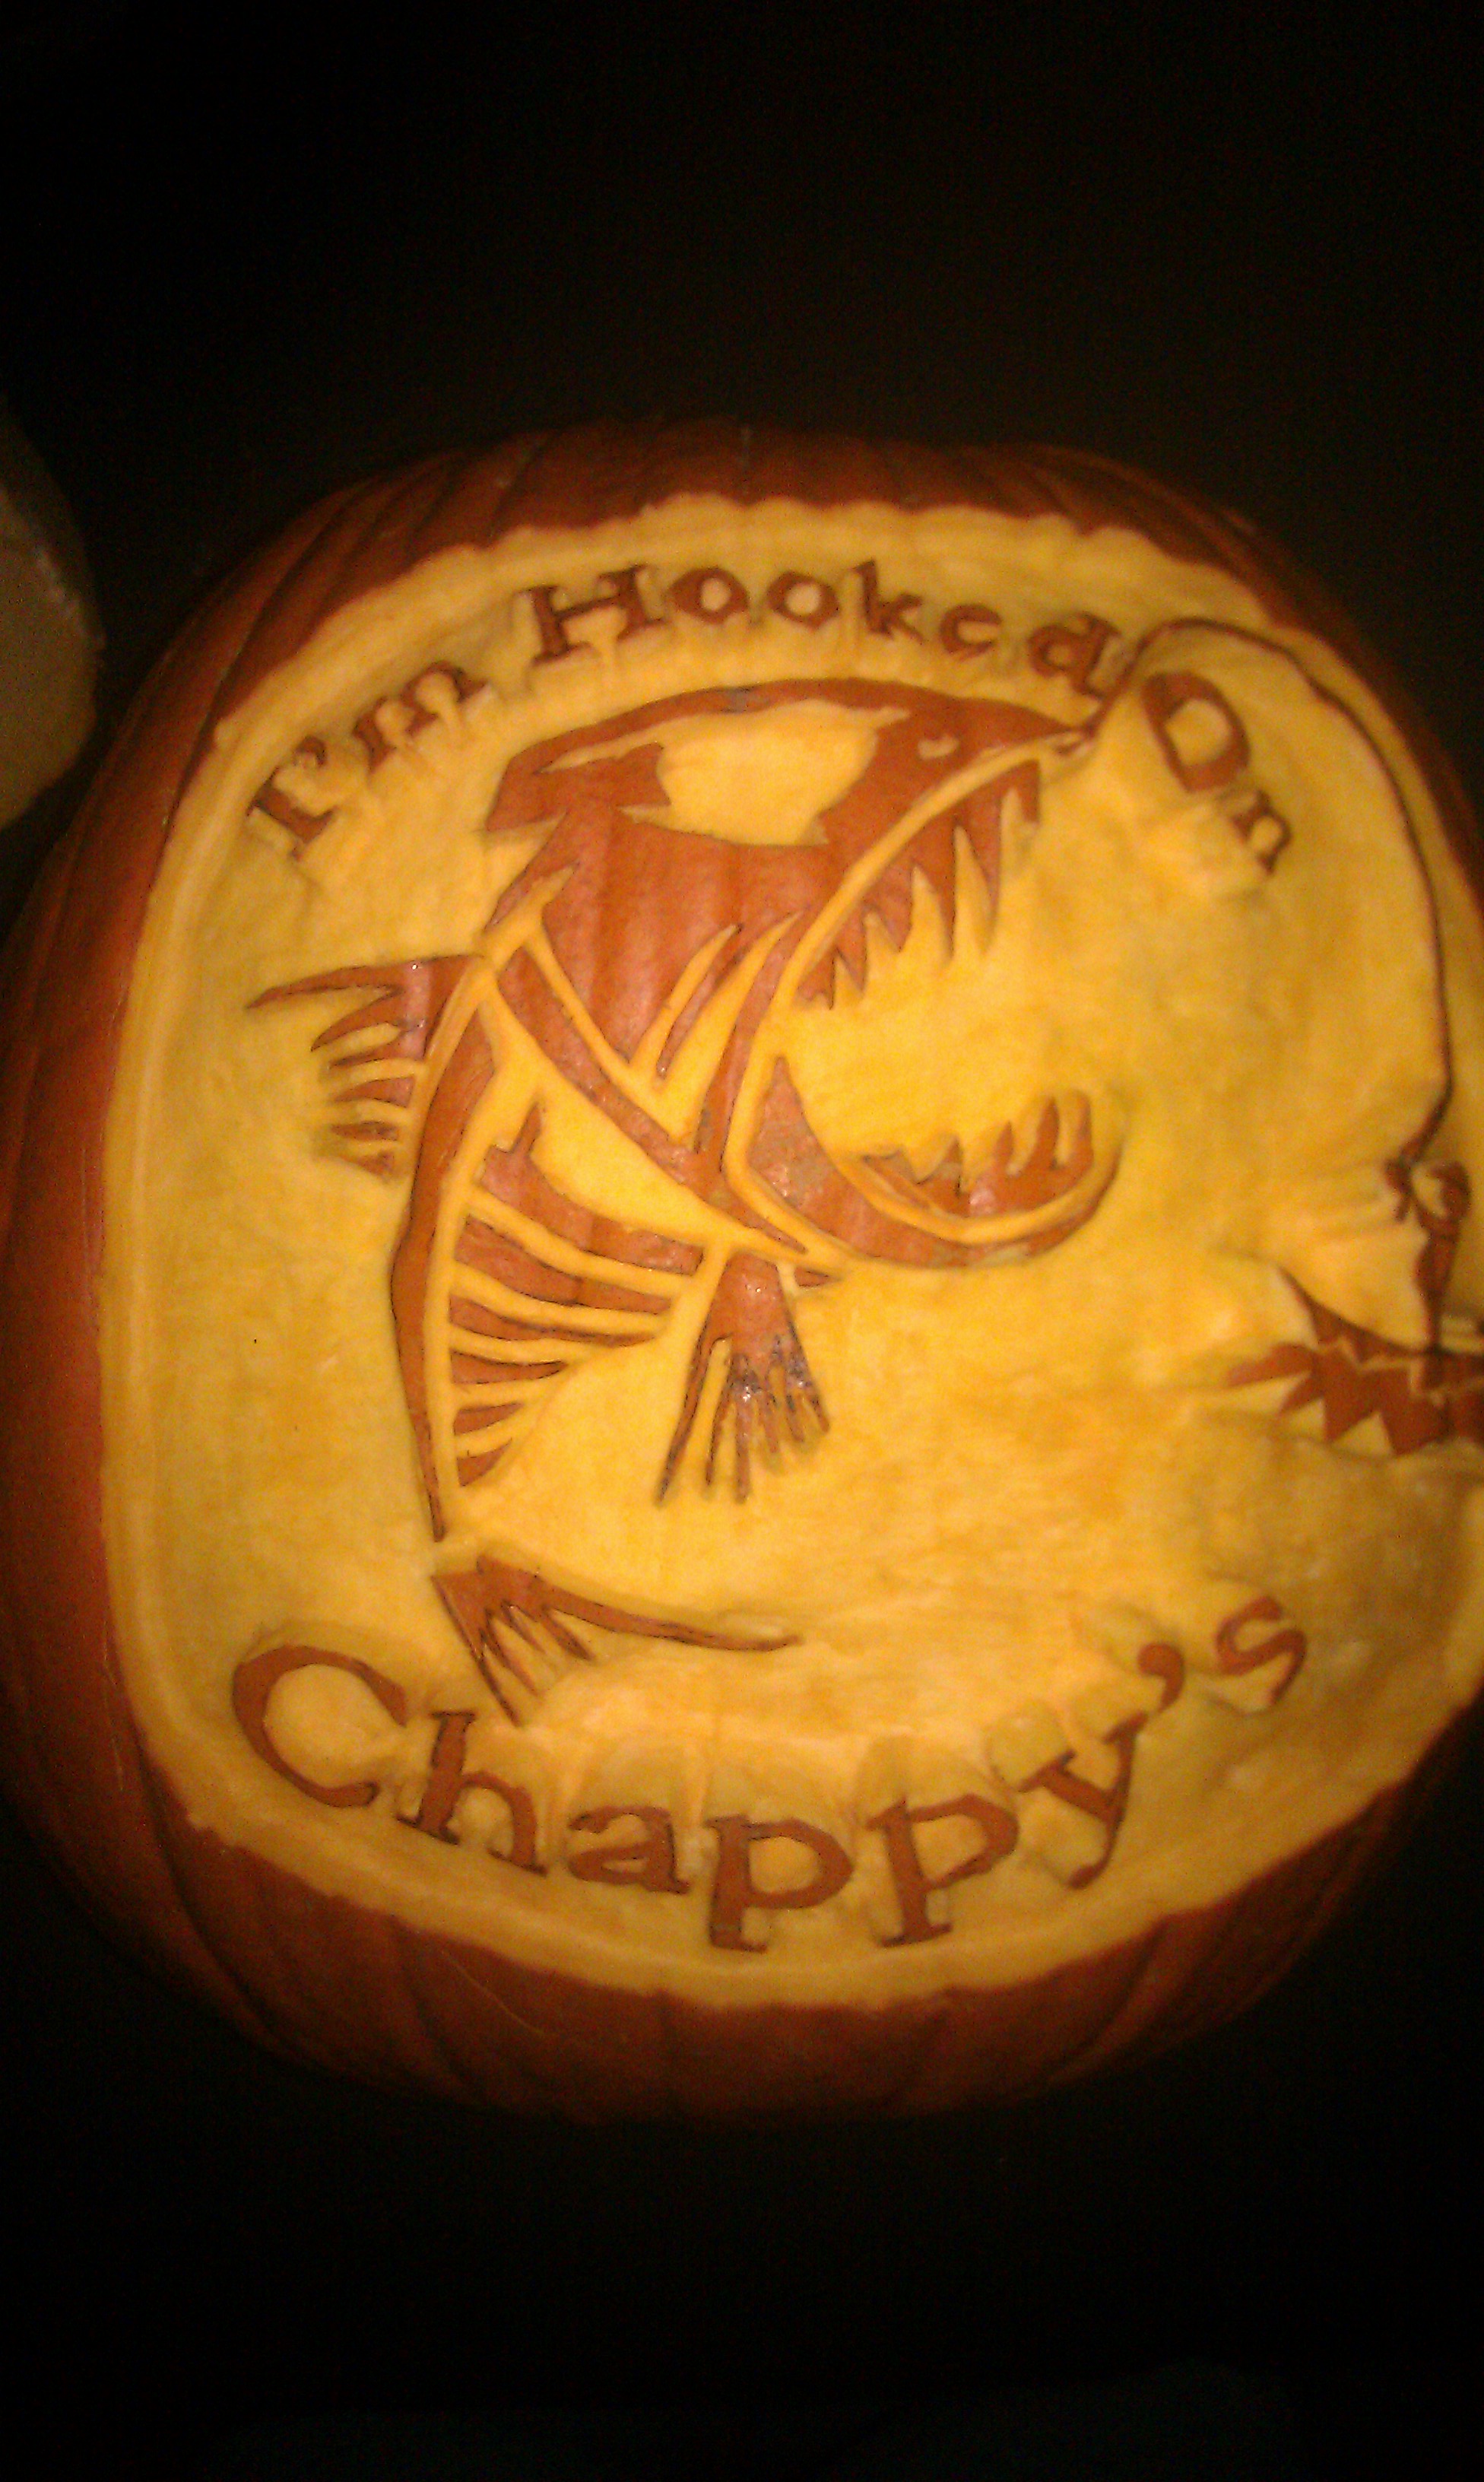 "I'm Hooked On Chappy's" 2012